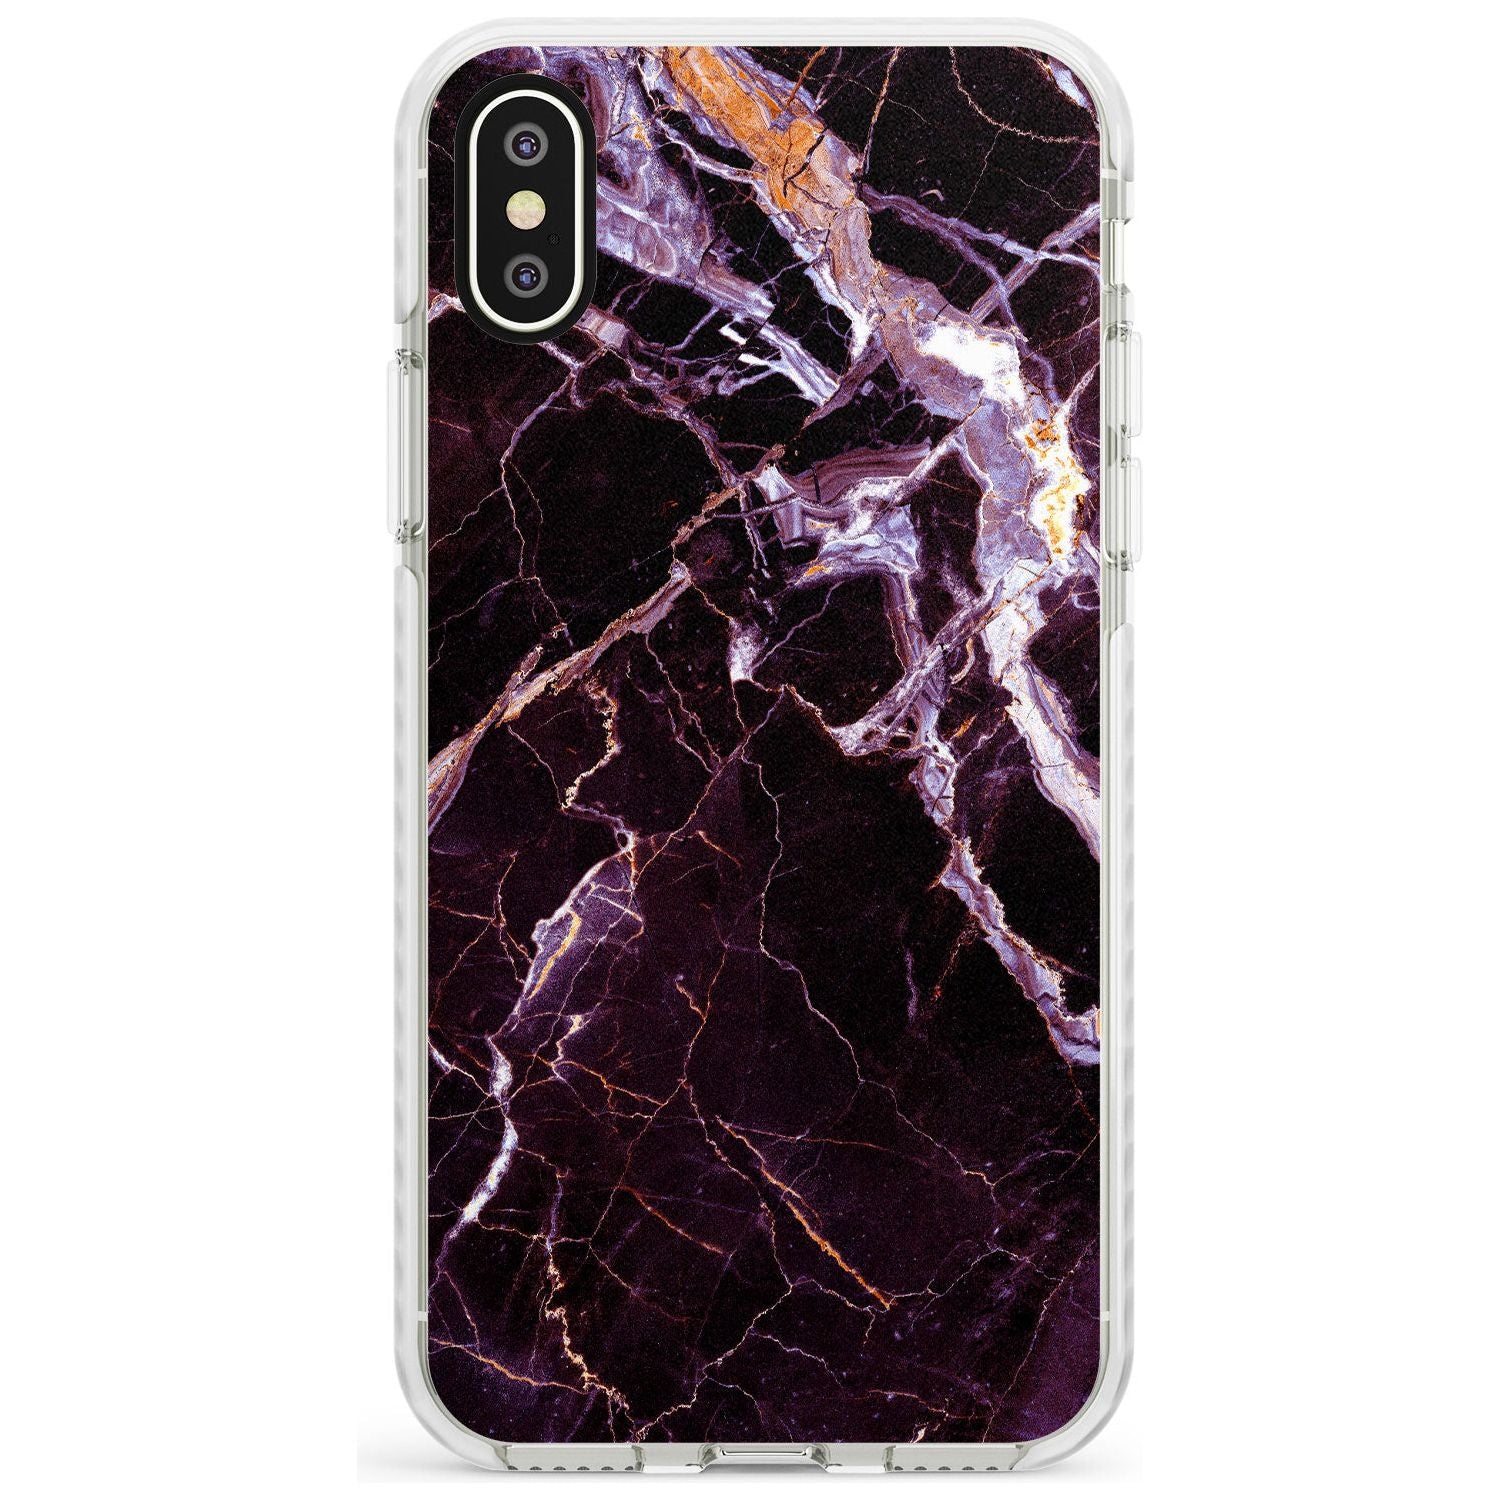 Black, Purple & Yellow shattered Marble Impact Phone Case for iPhone X XS Max XR